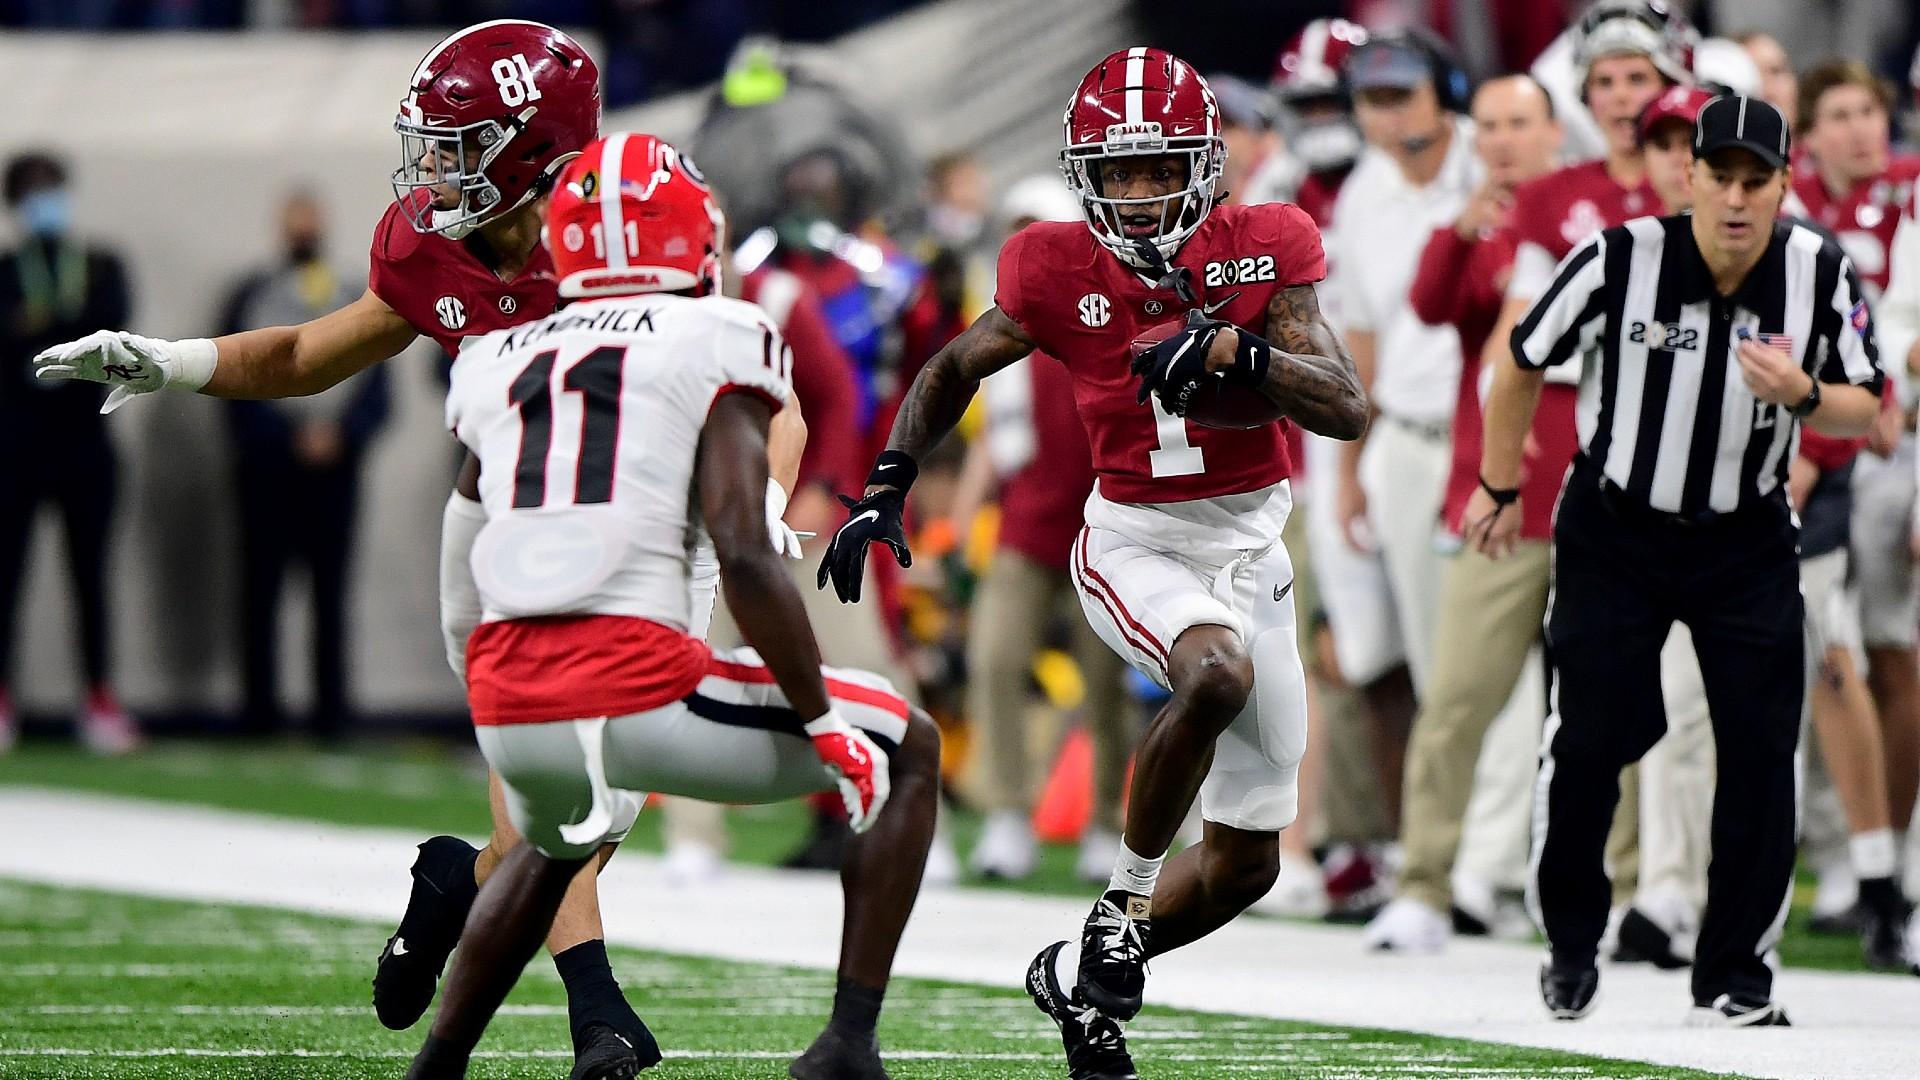 Jameson Williams injury update: Alabama WR suffered torn ACL in national title game against Georgia